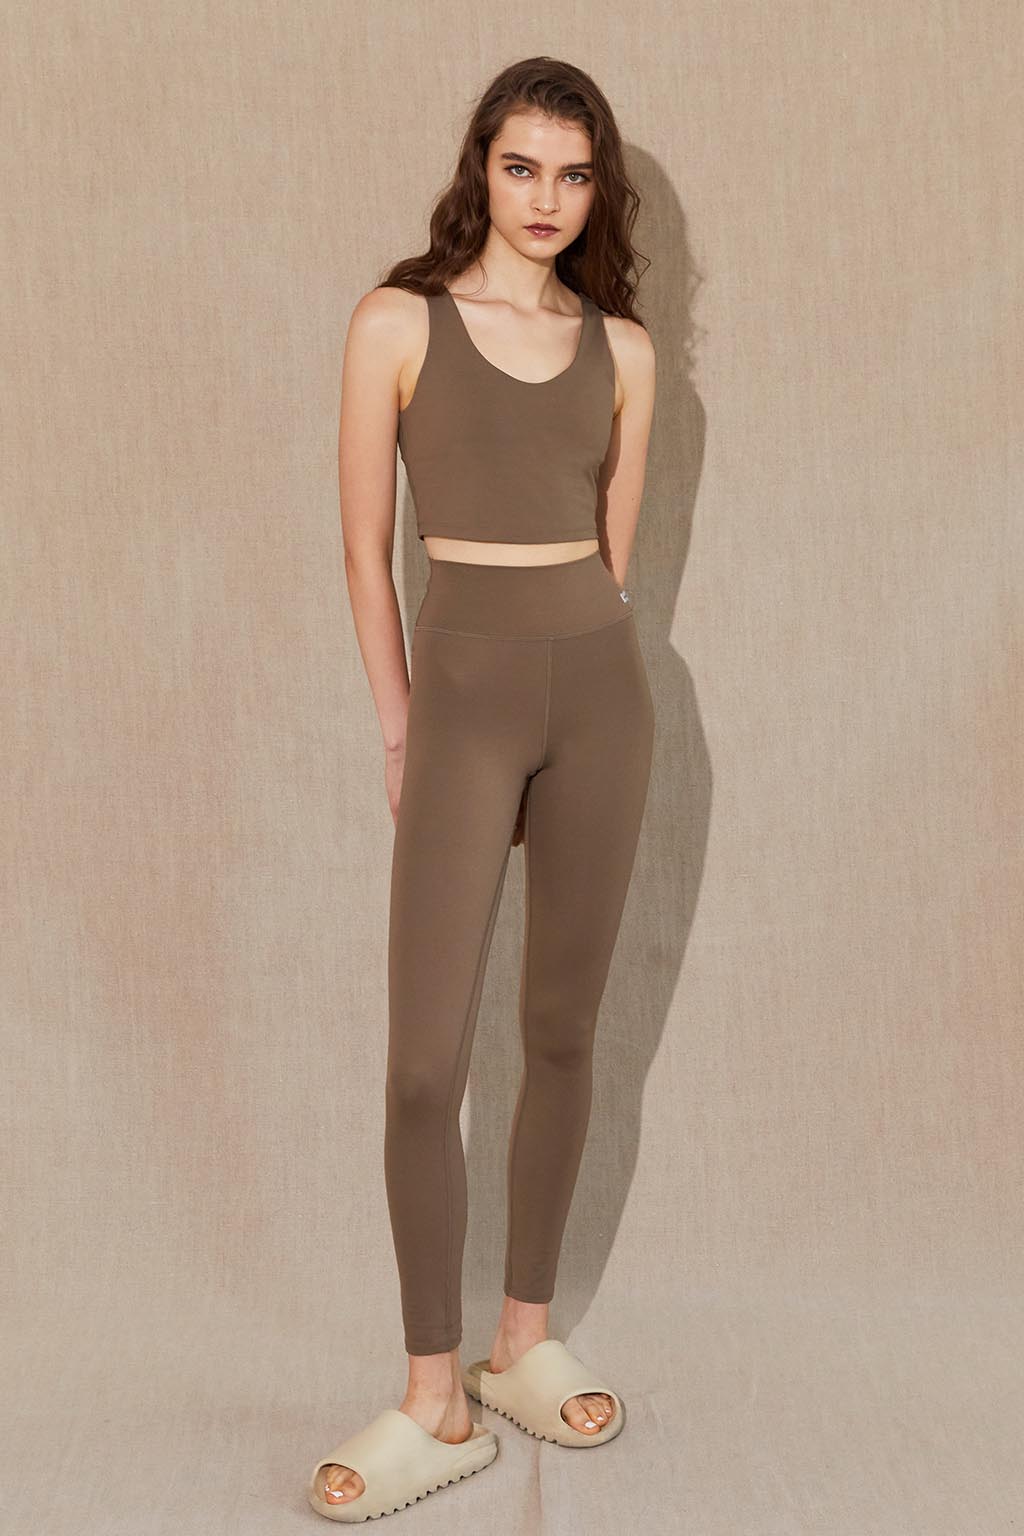 Halle Berry's Crop Top & Leggings In Sweaty Betty Campaign